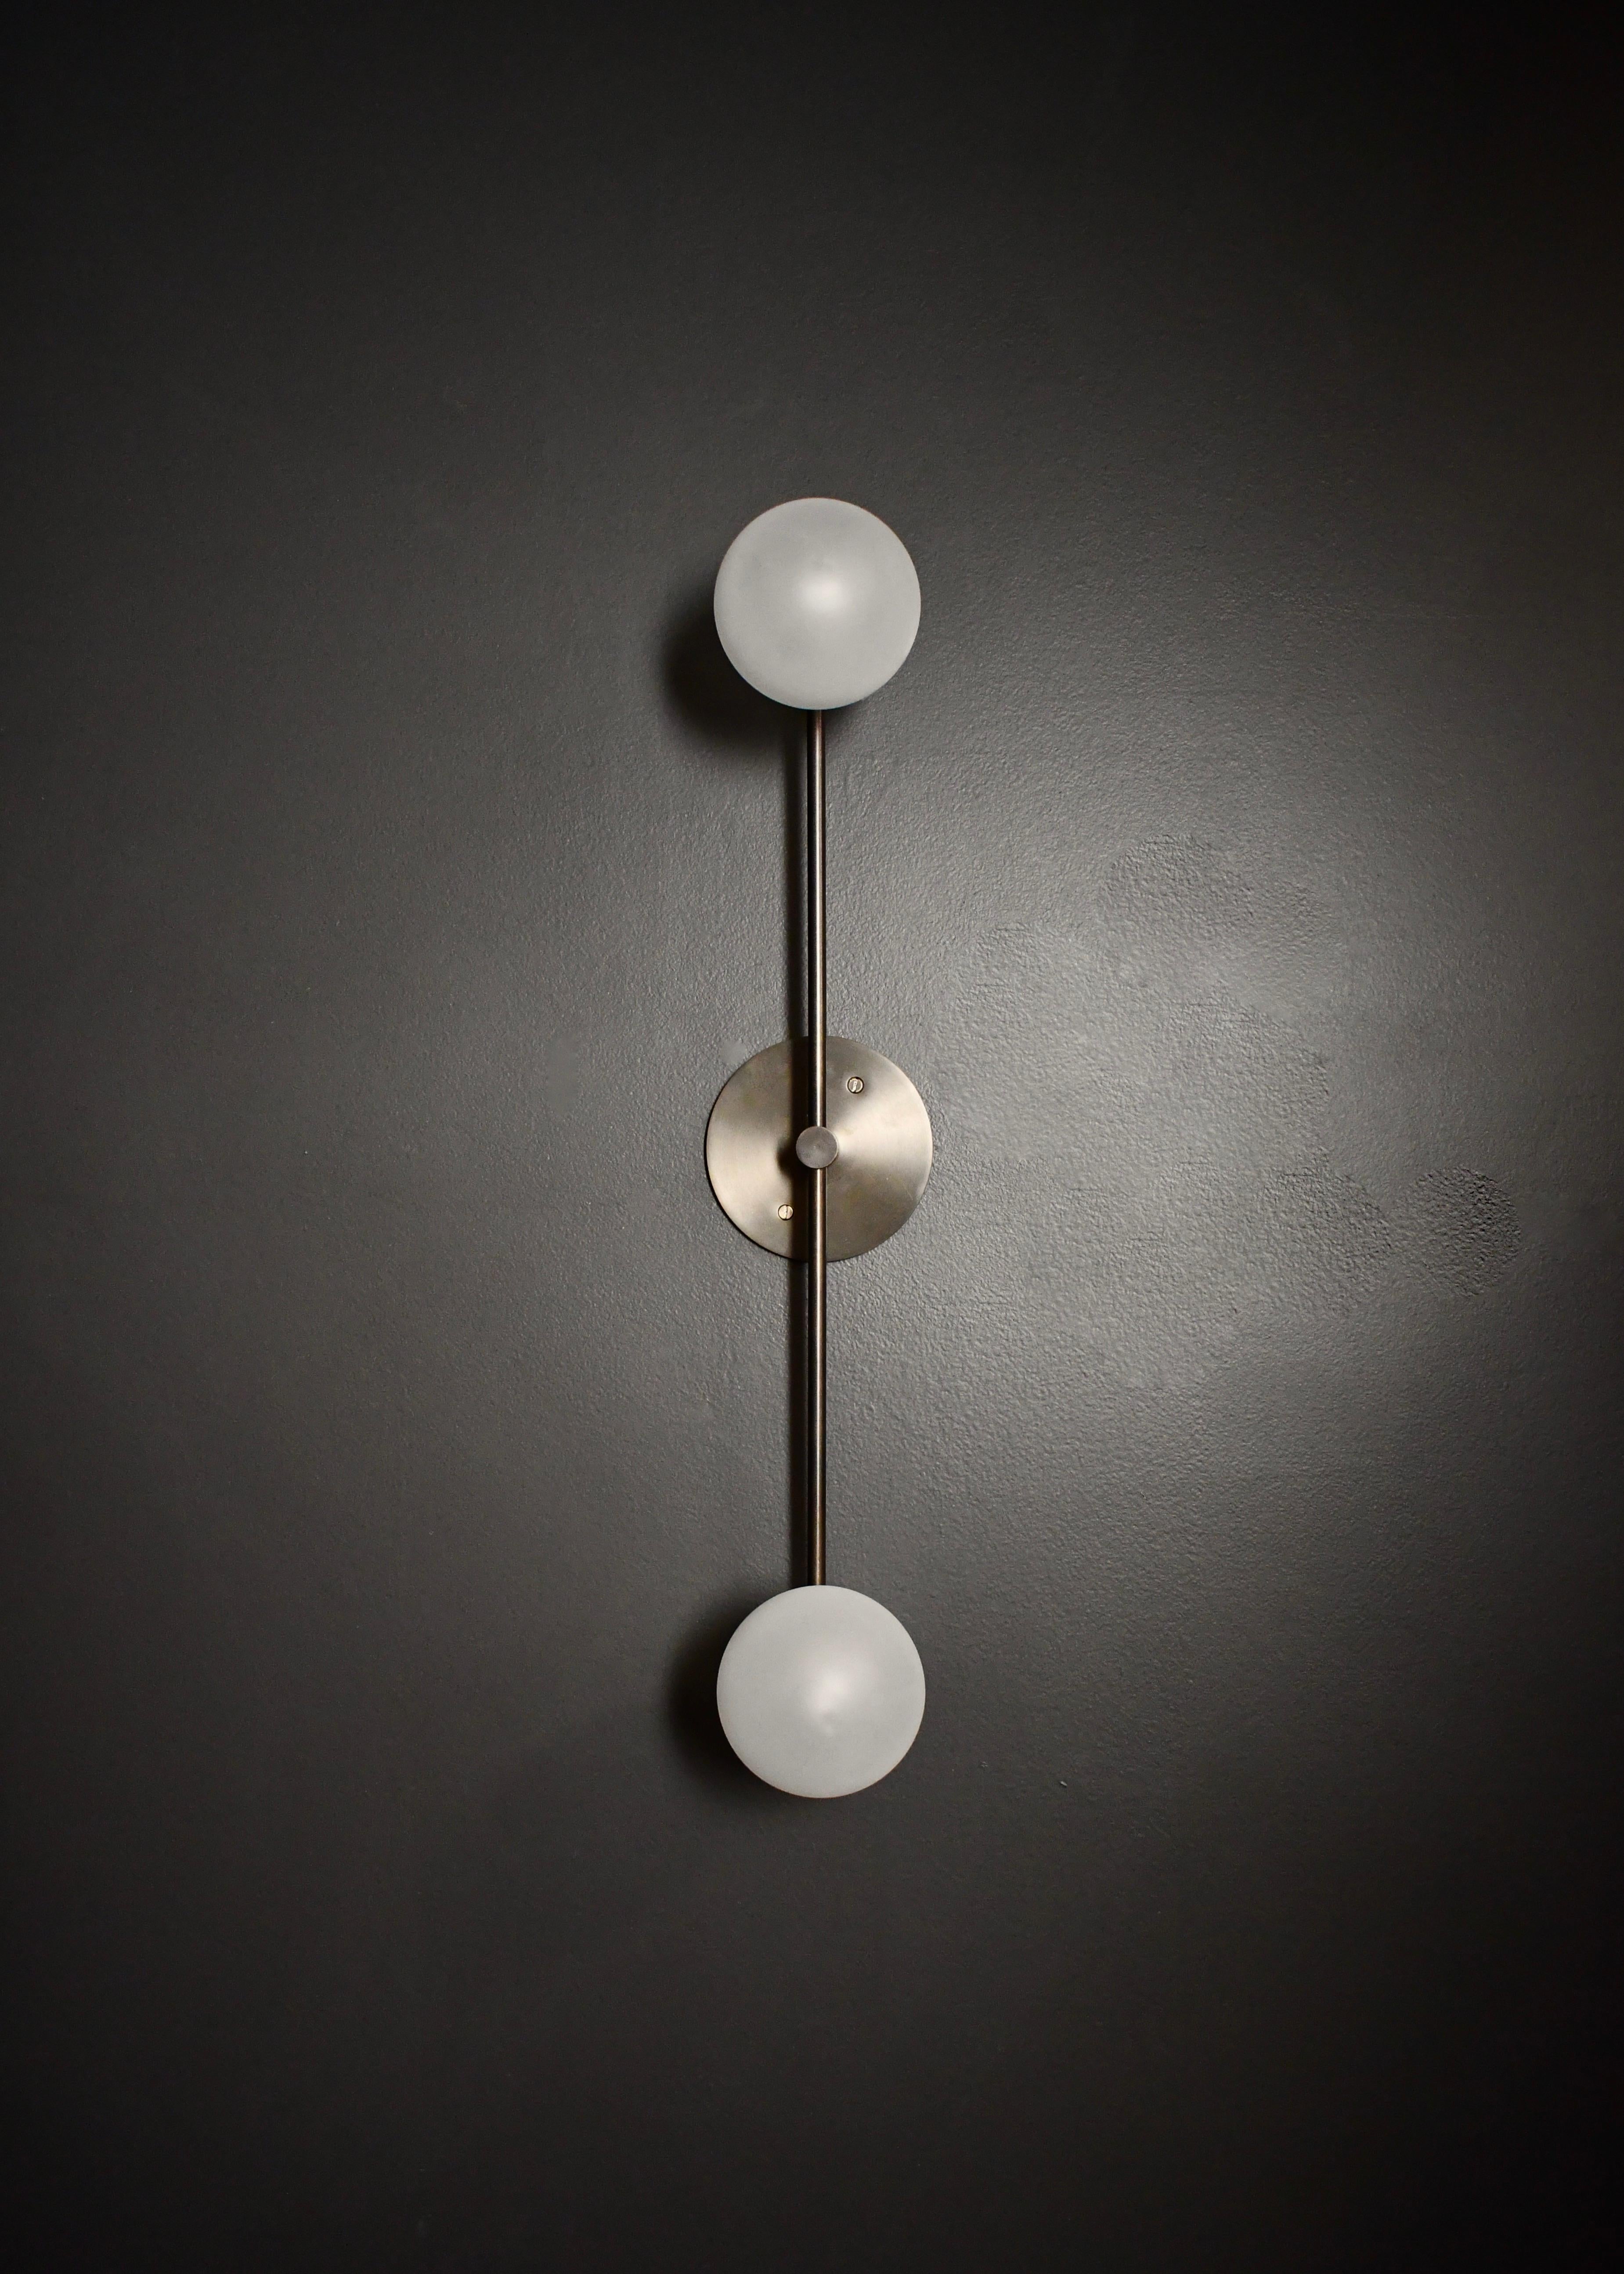 Segment wall lamp or flushmount ceiling fixture by Blueprint Lighting, 2020.
A handsome study in clean lines and simple form inspired by the tenets of the Bauhaus, Segment is truly a go-anywhere design and is equally at home in residential,